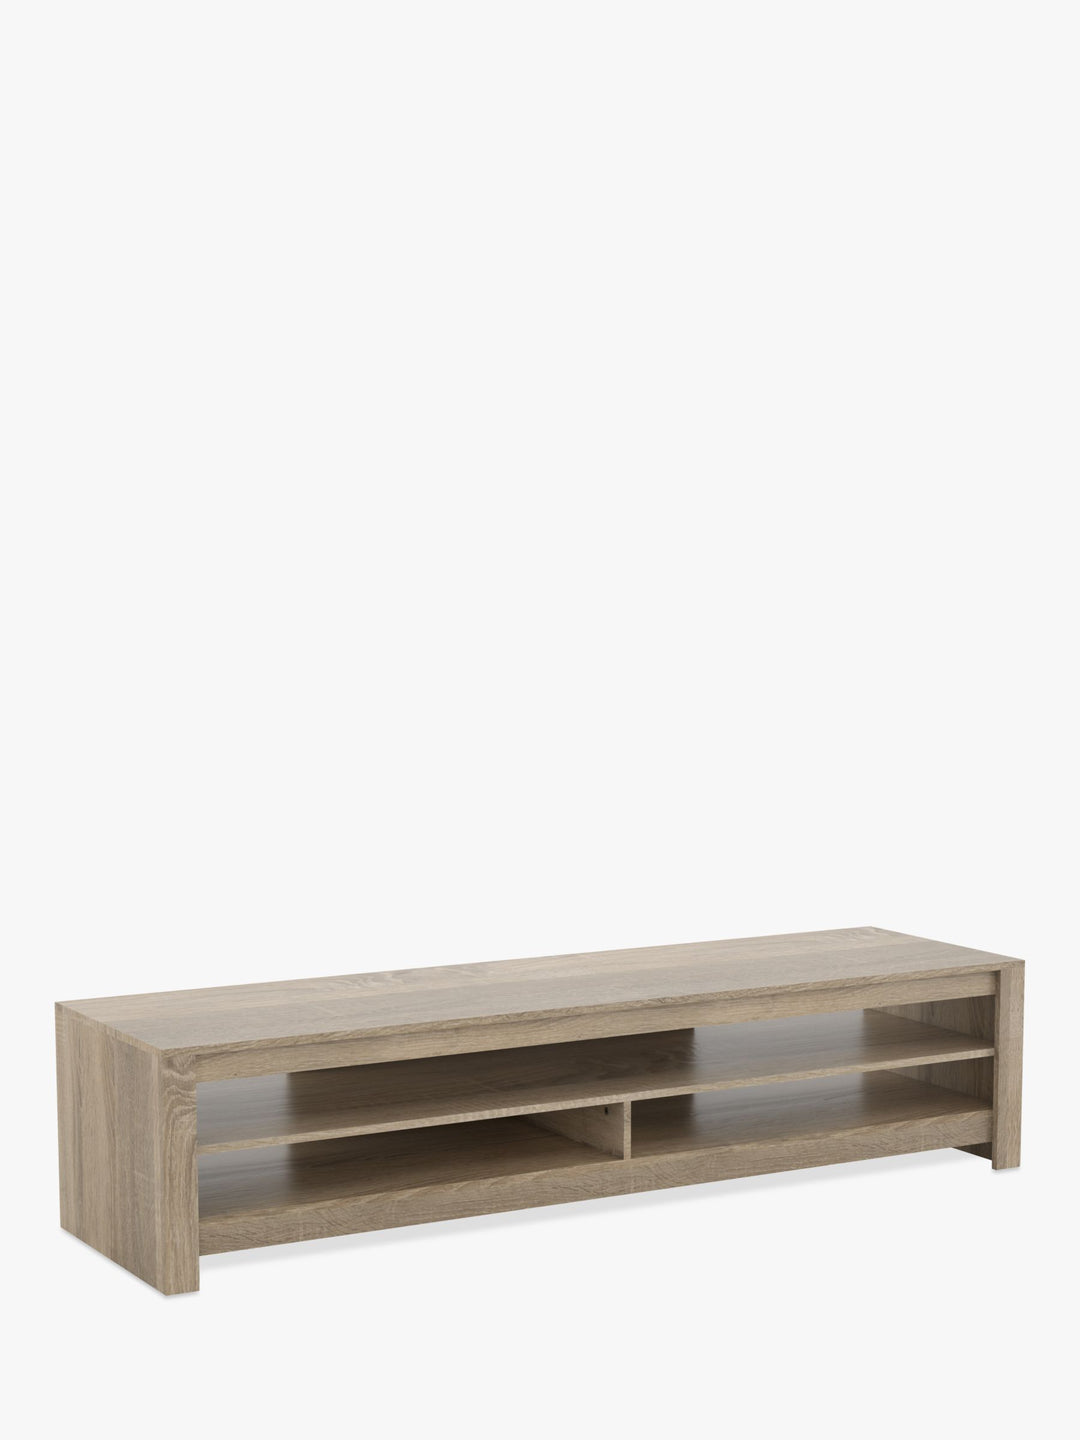 AVF Calibre 180 TV Stand for TVs up to 85", Rustic Sawn Oak